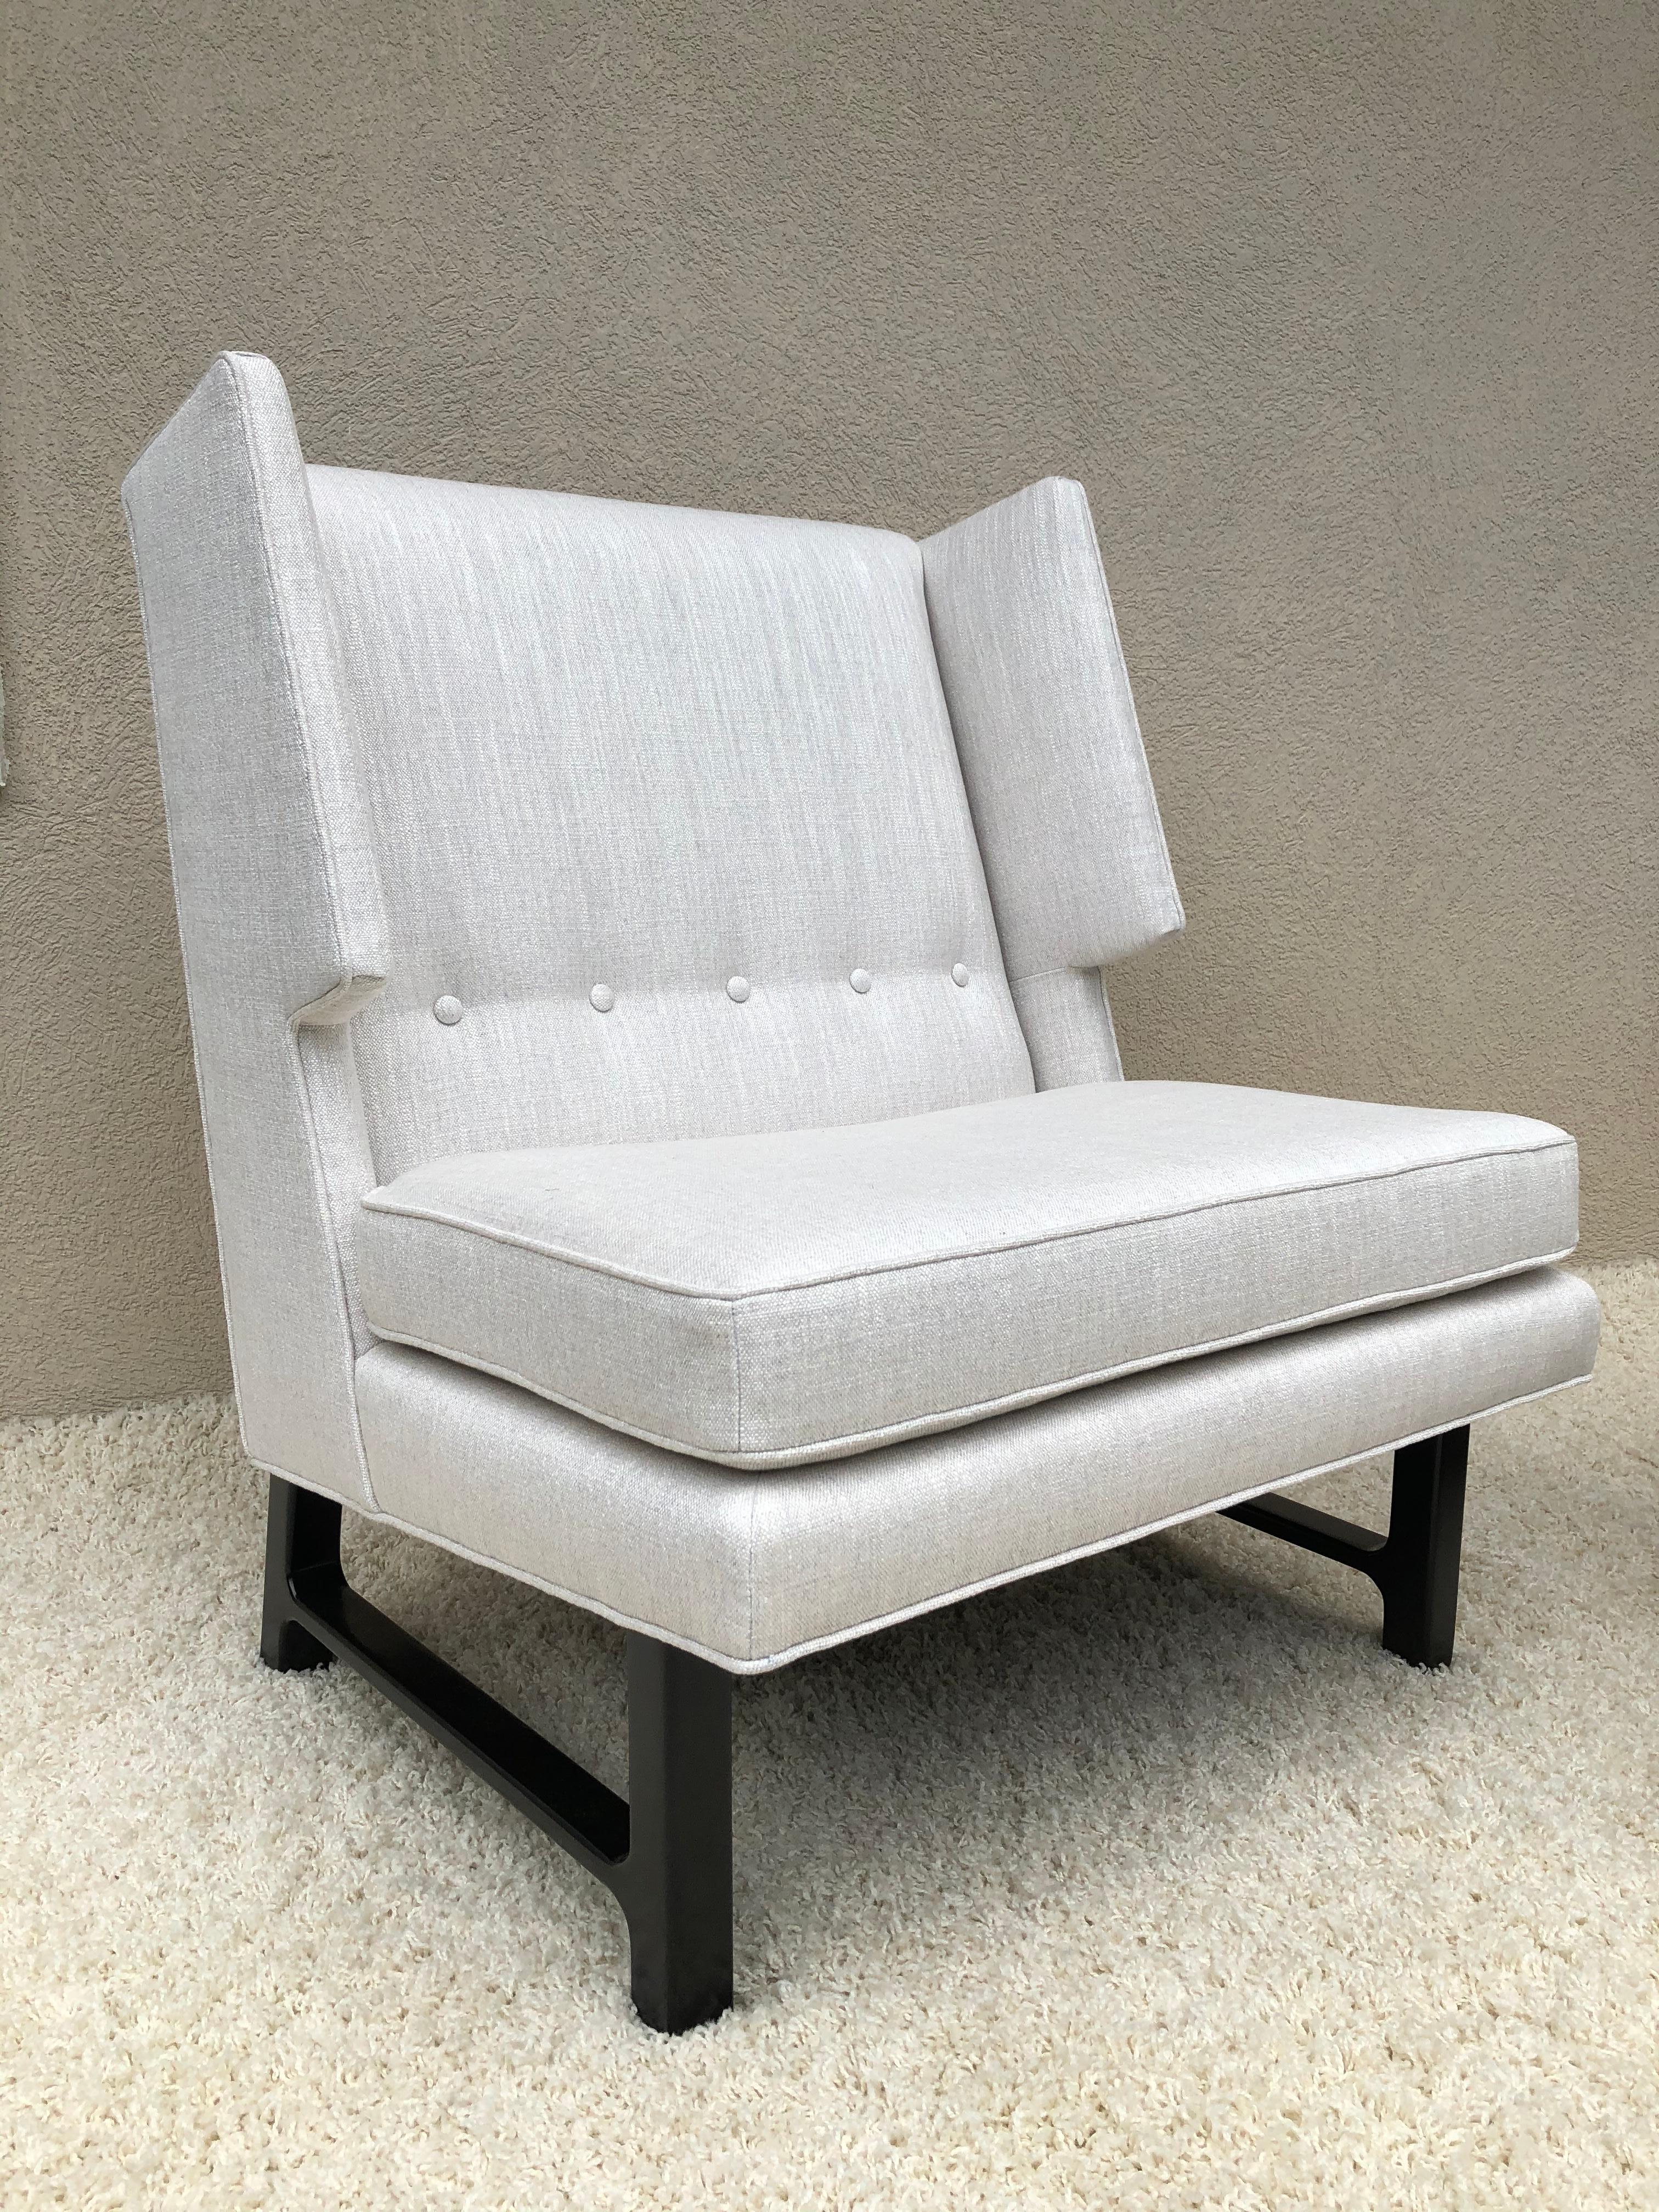 Pair of Harvey Probber high back wing chairs, important with very few made and from the Edward Wormley estate in Weston ct. Edward Wormley (American, December 31, 1907–November 3, 1995) was a noted furniture designer.
 Wormley began his education at